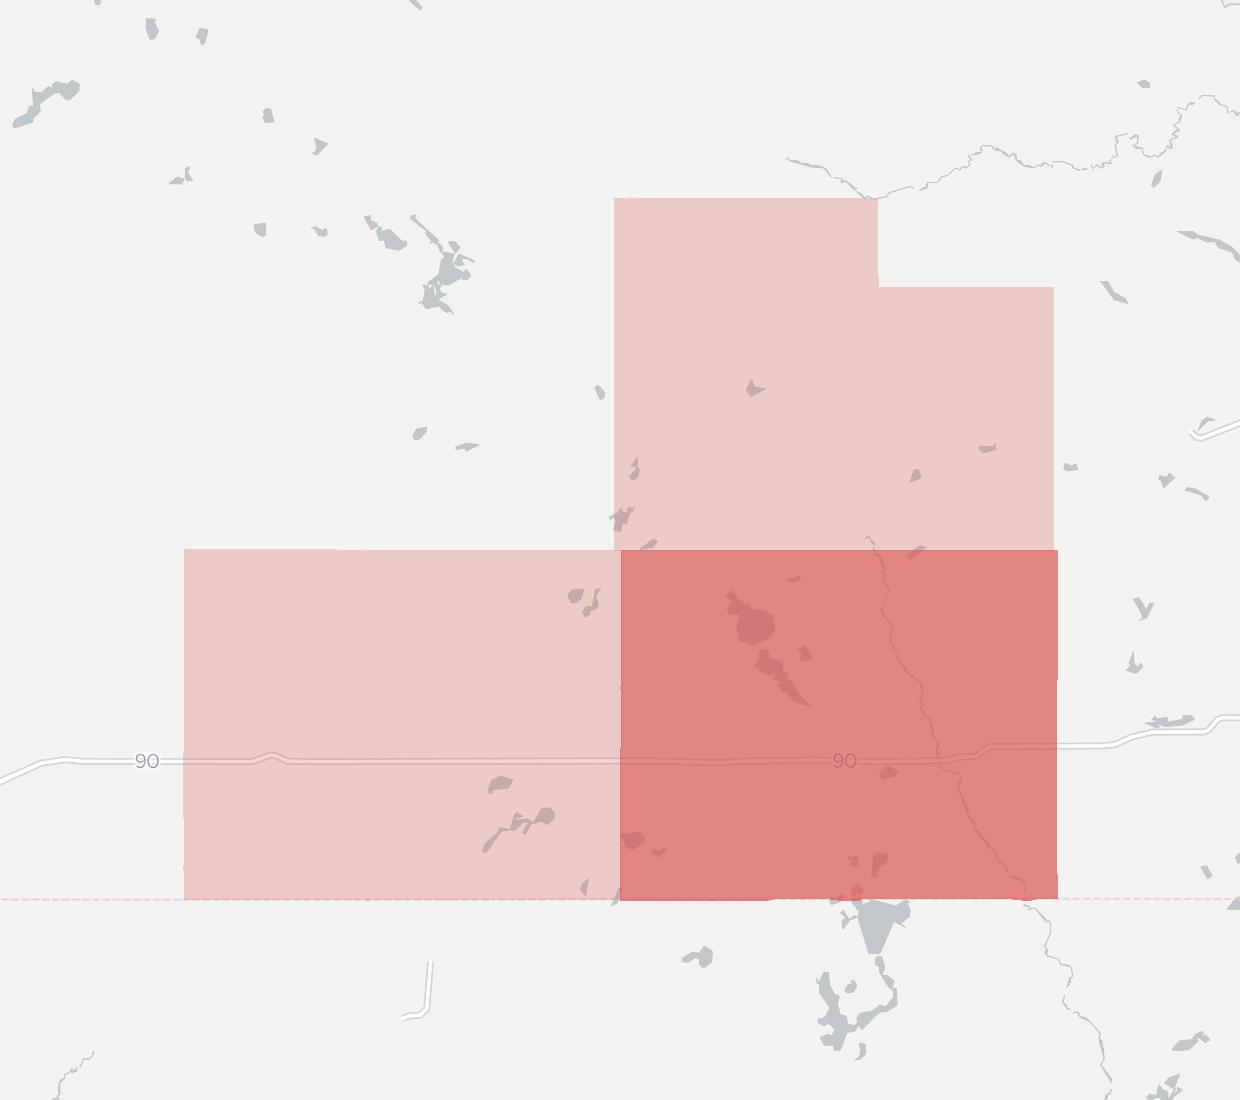 Southwest Minnesota Broadband Services Availability Map. Click for interactive map